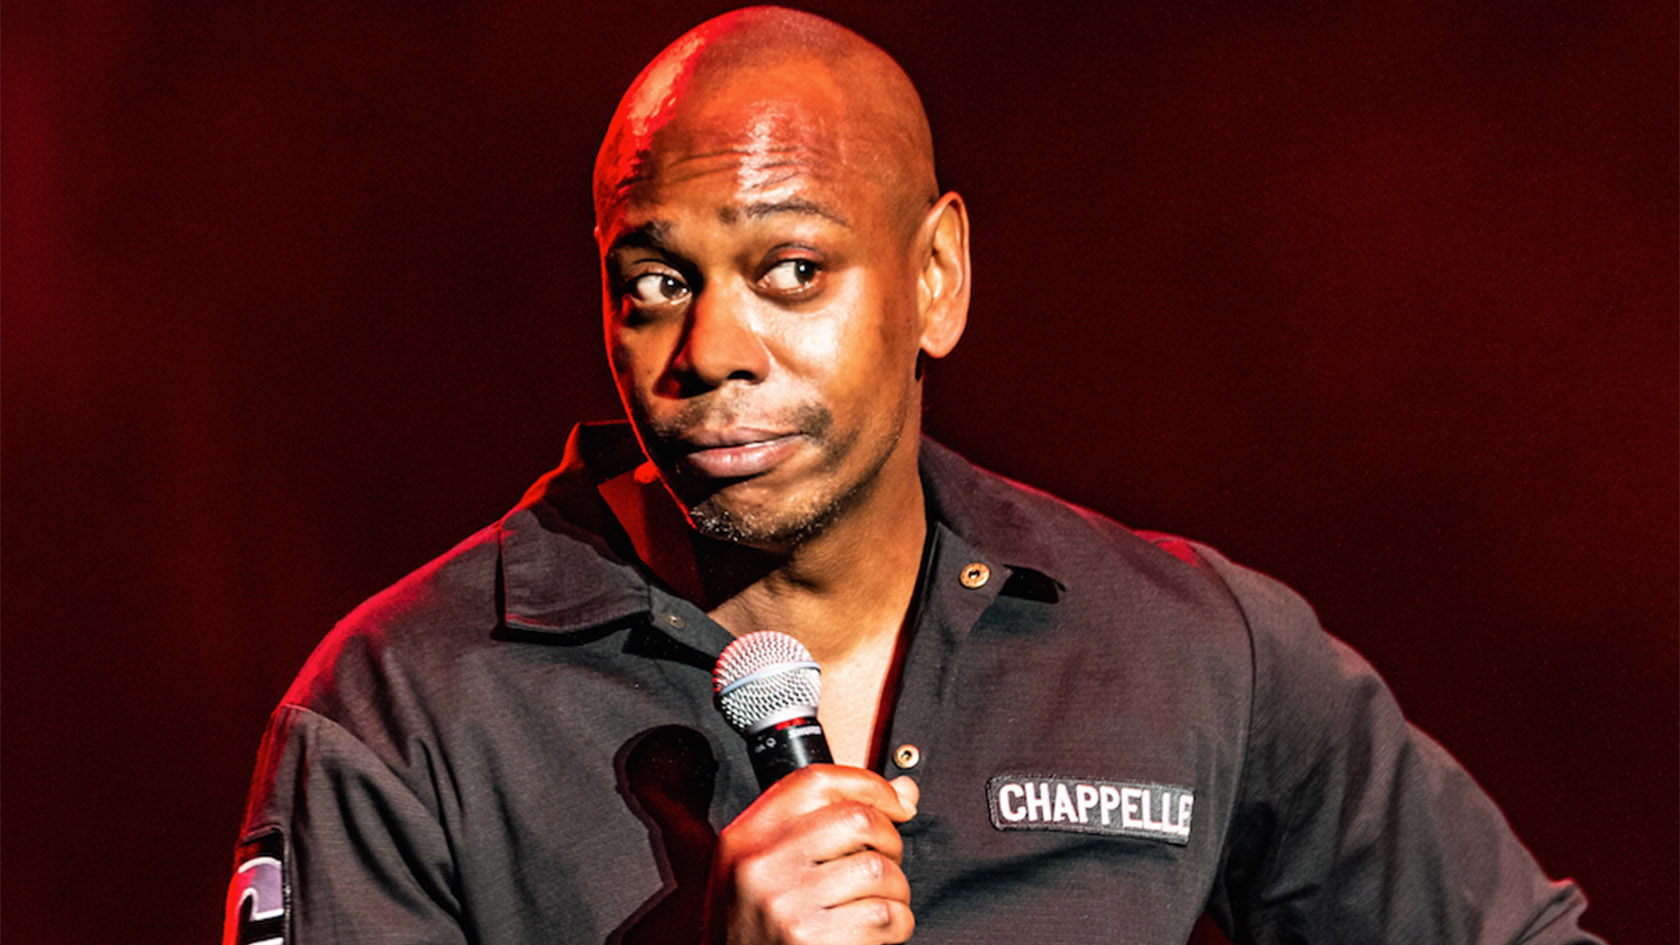 Watch: Dave Chappelle Hits Back At Critics In Emmy Acceptance Speech